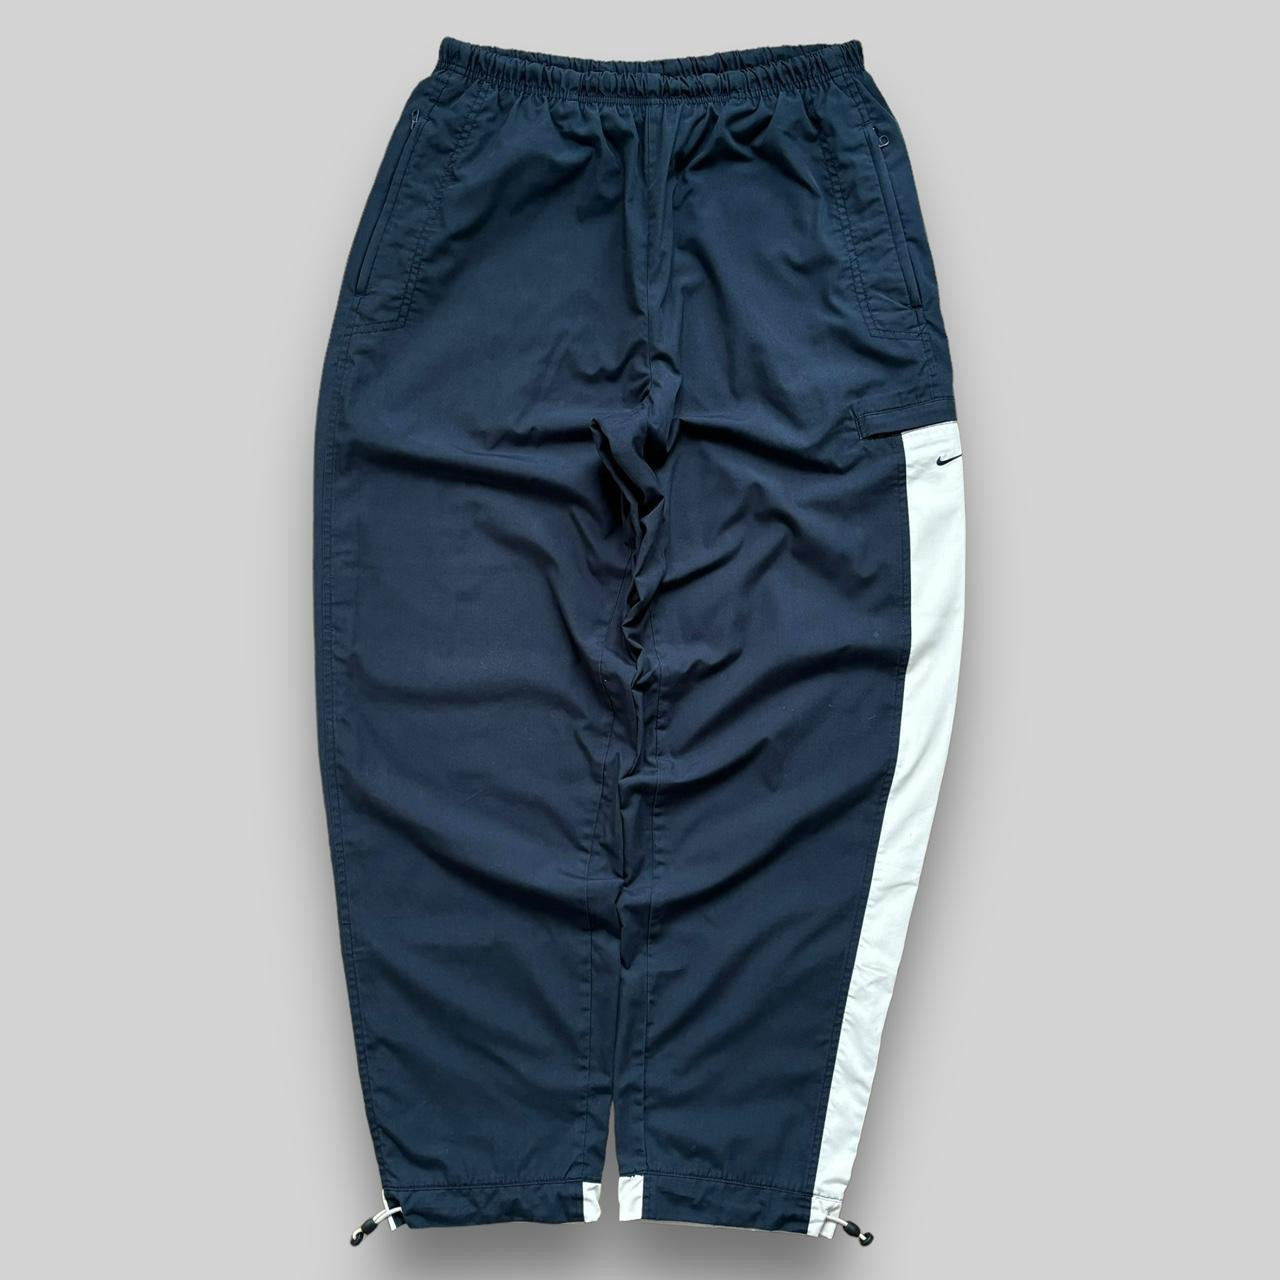 Nike Relaxed Fit Swoosh Trackpants (Medium)